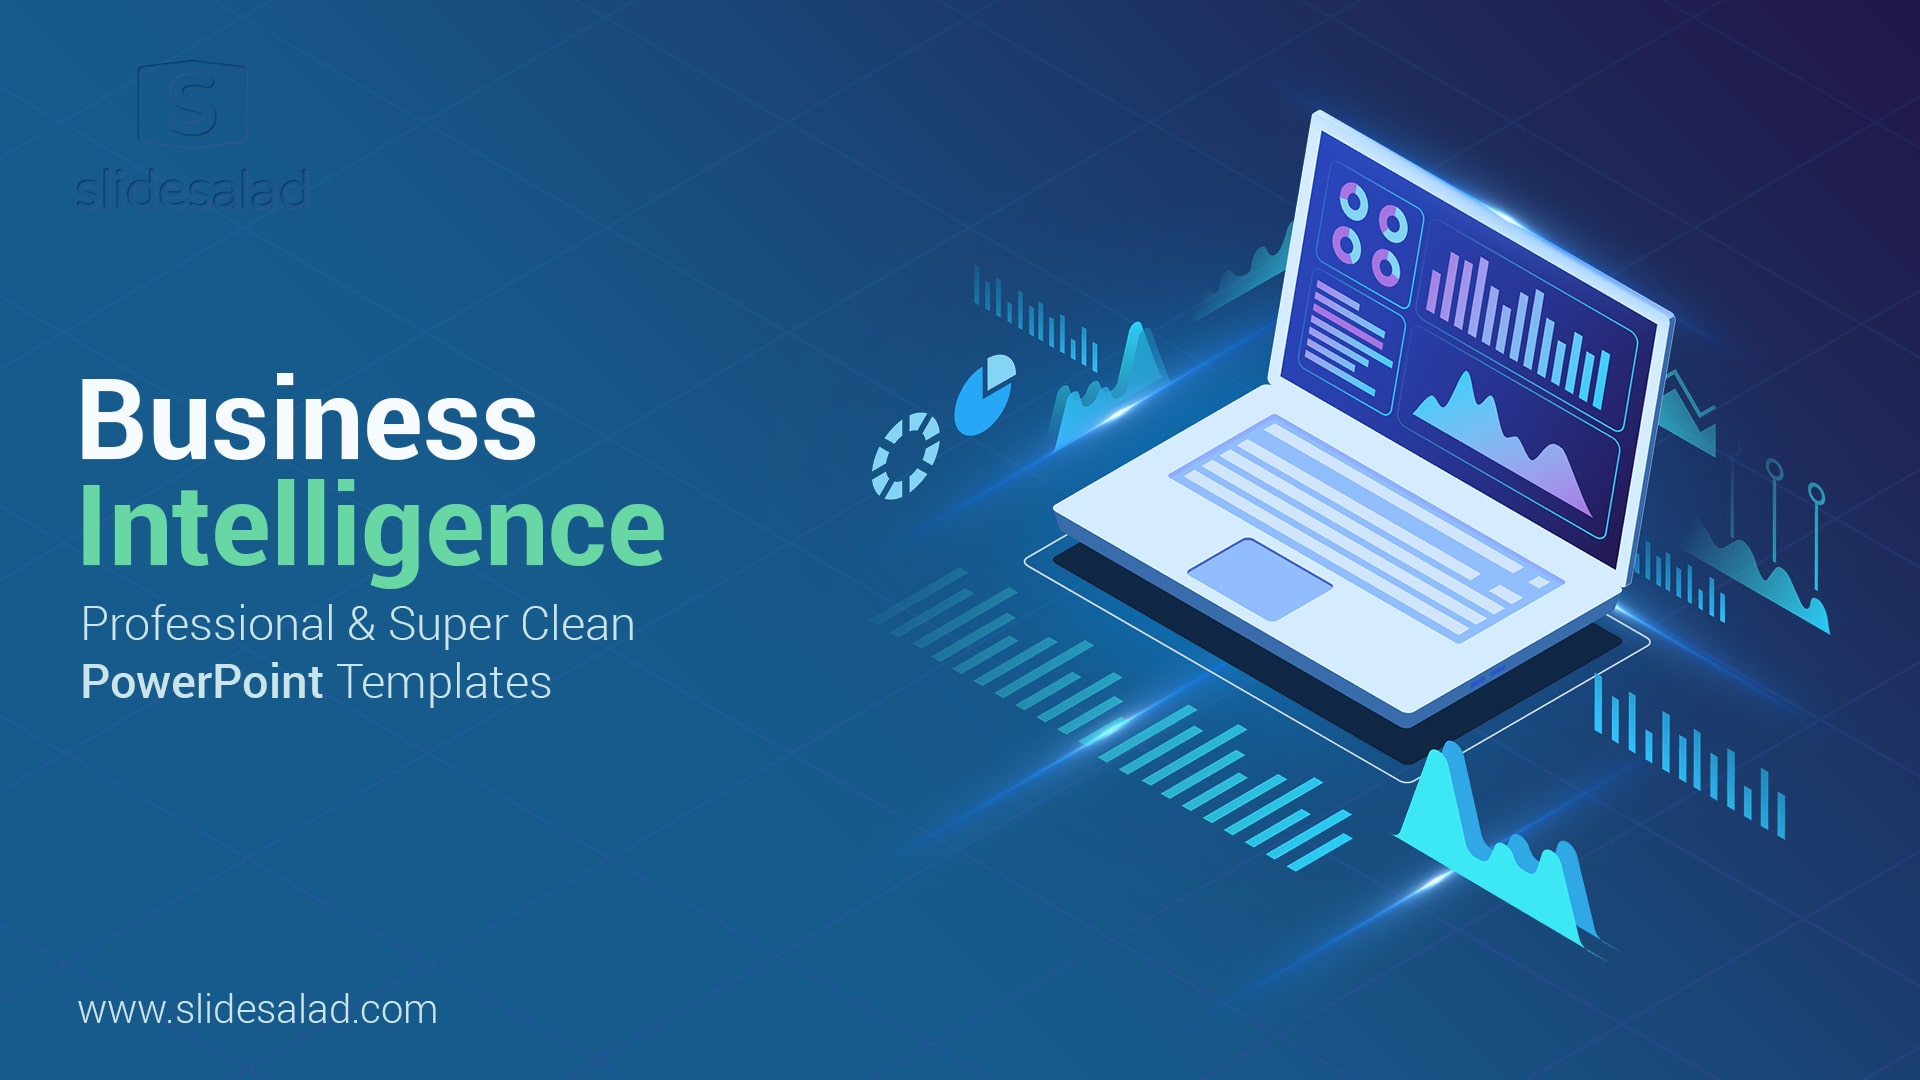 Business Intelligence PowerPoint Template Designs - Innovative PPT Theme That Shows How BI Can Help You Get Ahead of the Competition